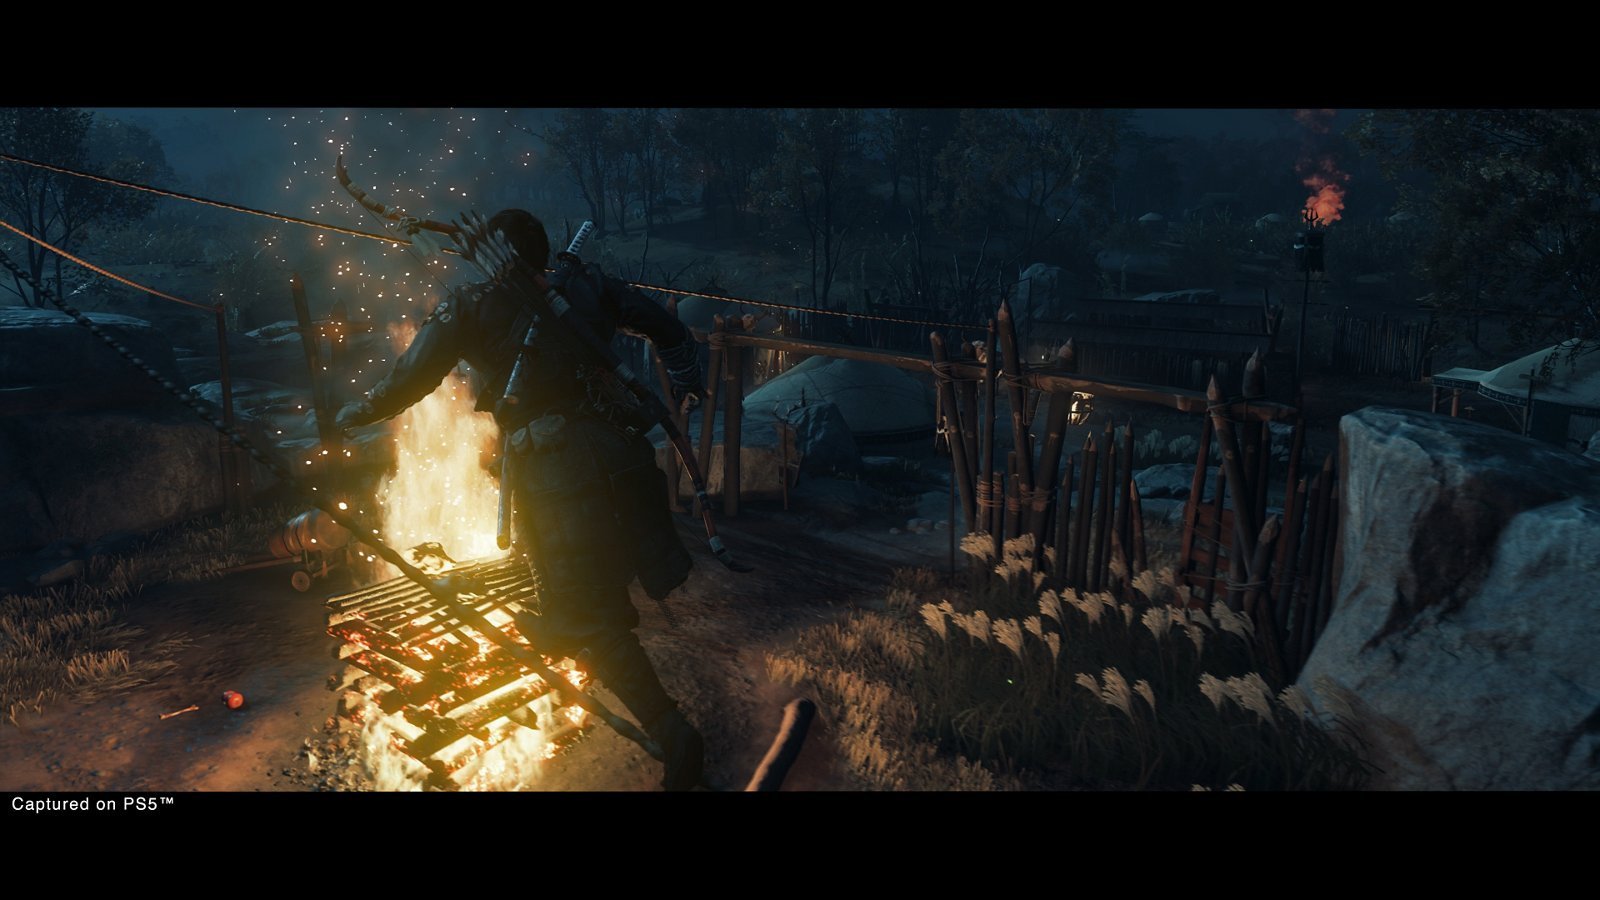 Ghost of Tsushima: Director's Cut Review – GameSpew